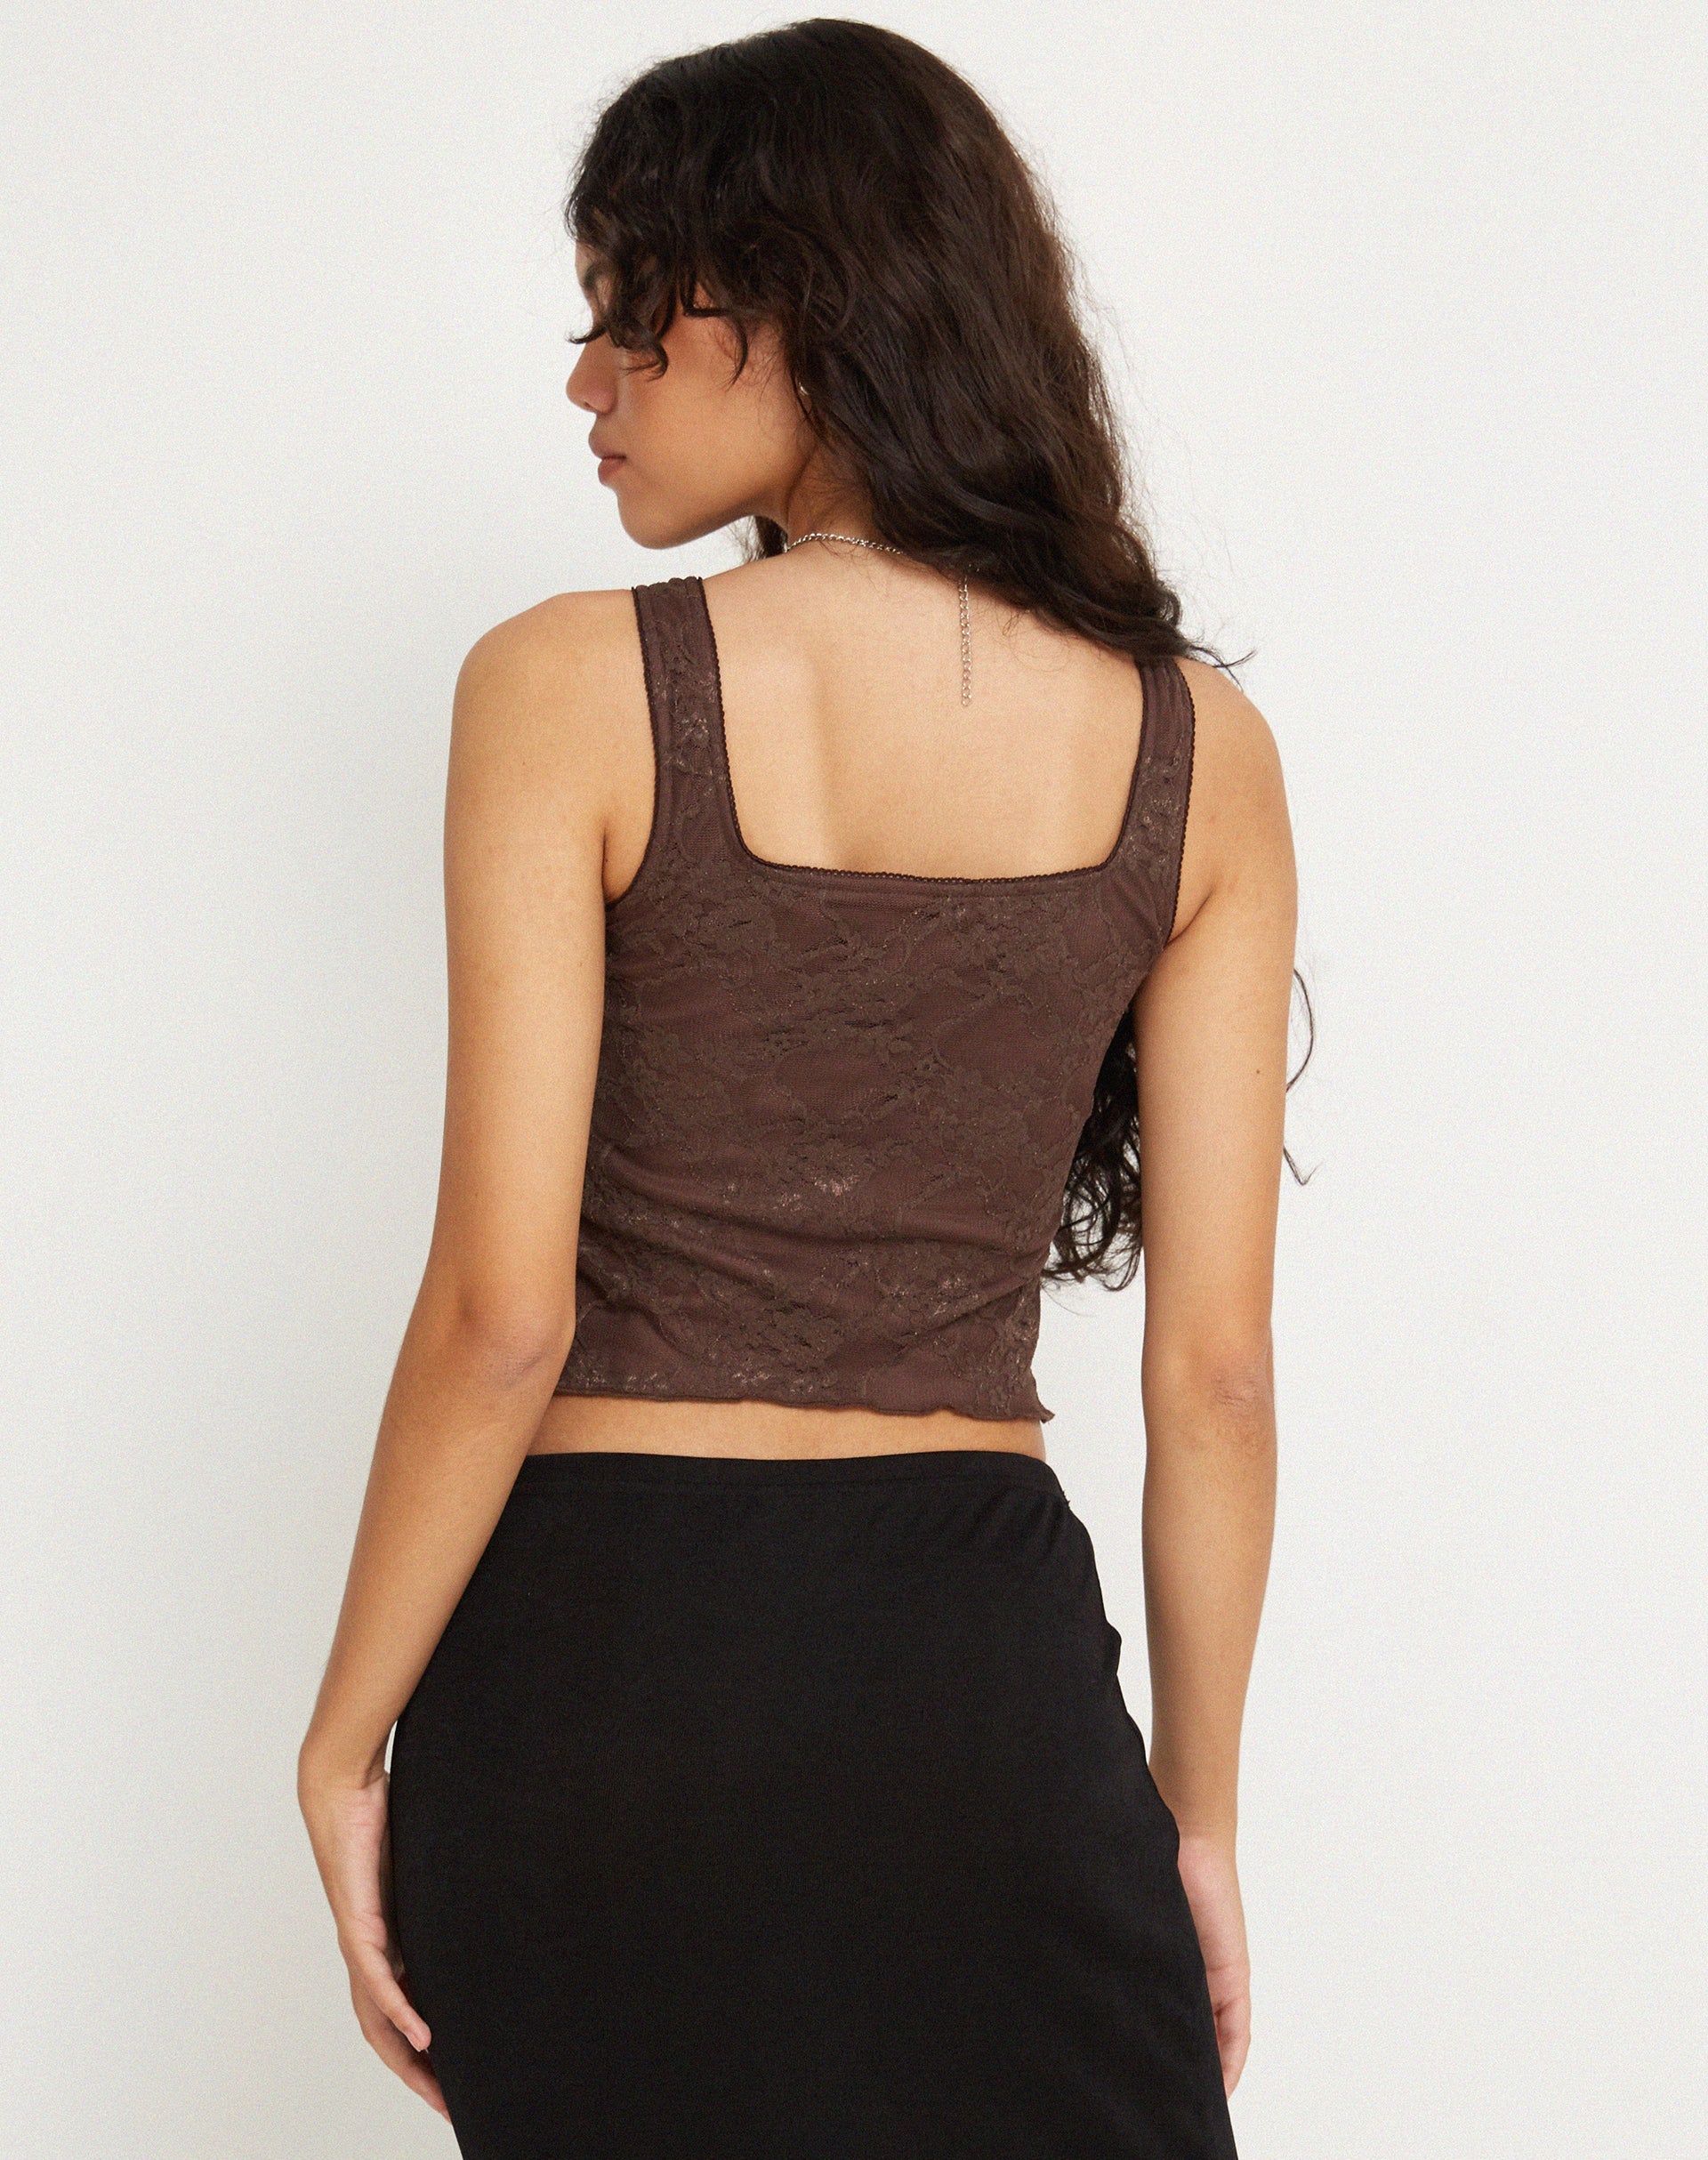 image of Asahi Crop Top in Lace Chestnut Brown